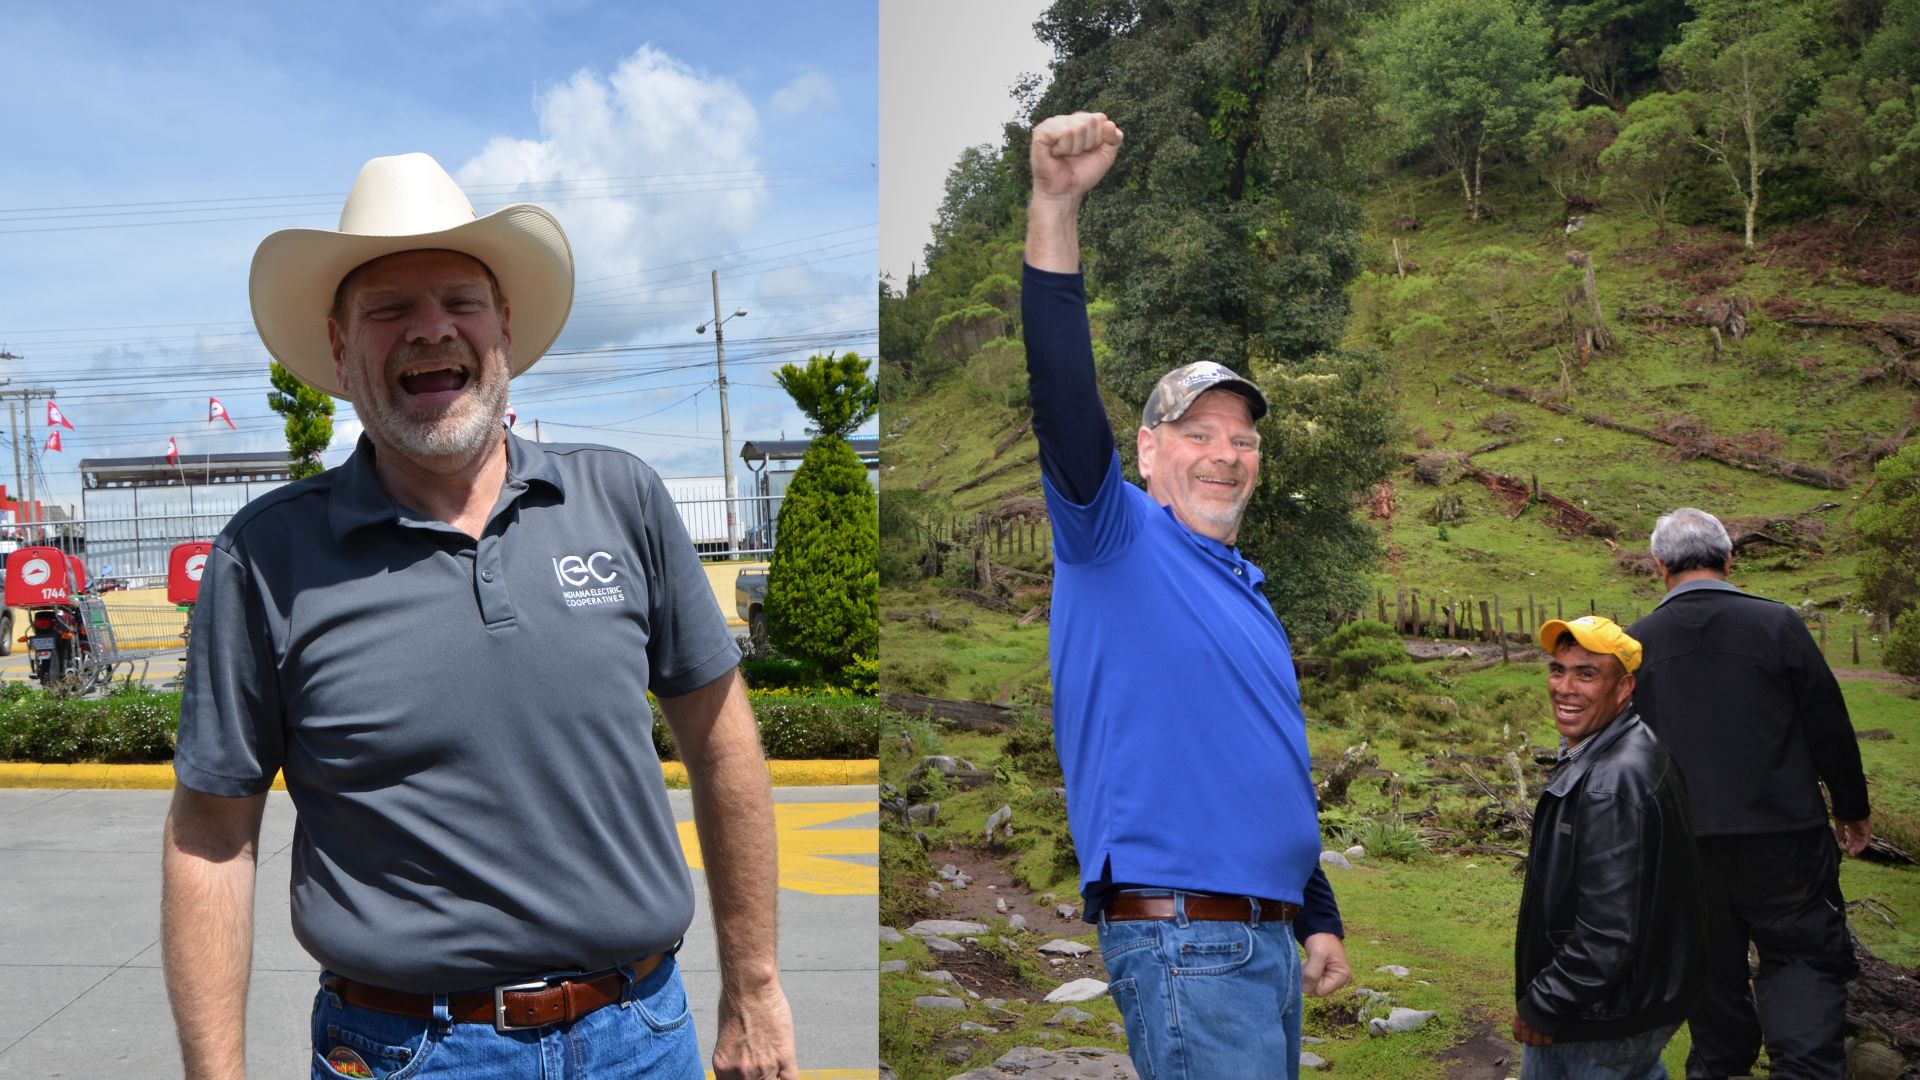 Steve McMichael in Guatemala helping with new electric cooperative board governance